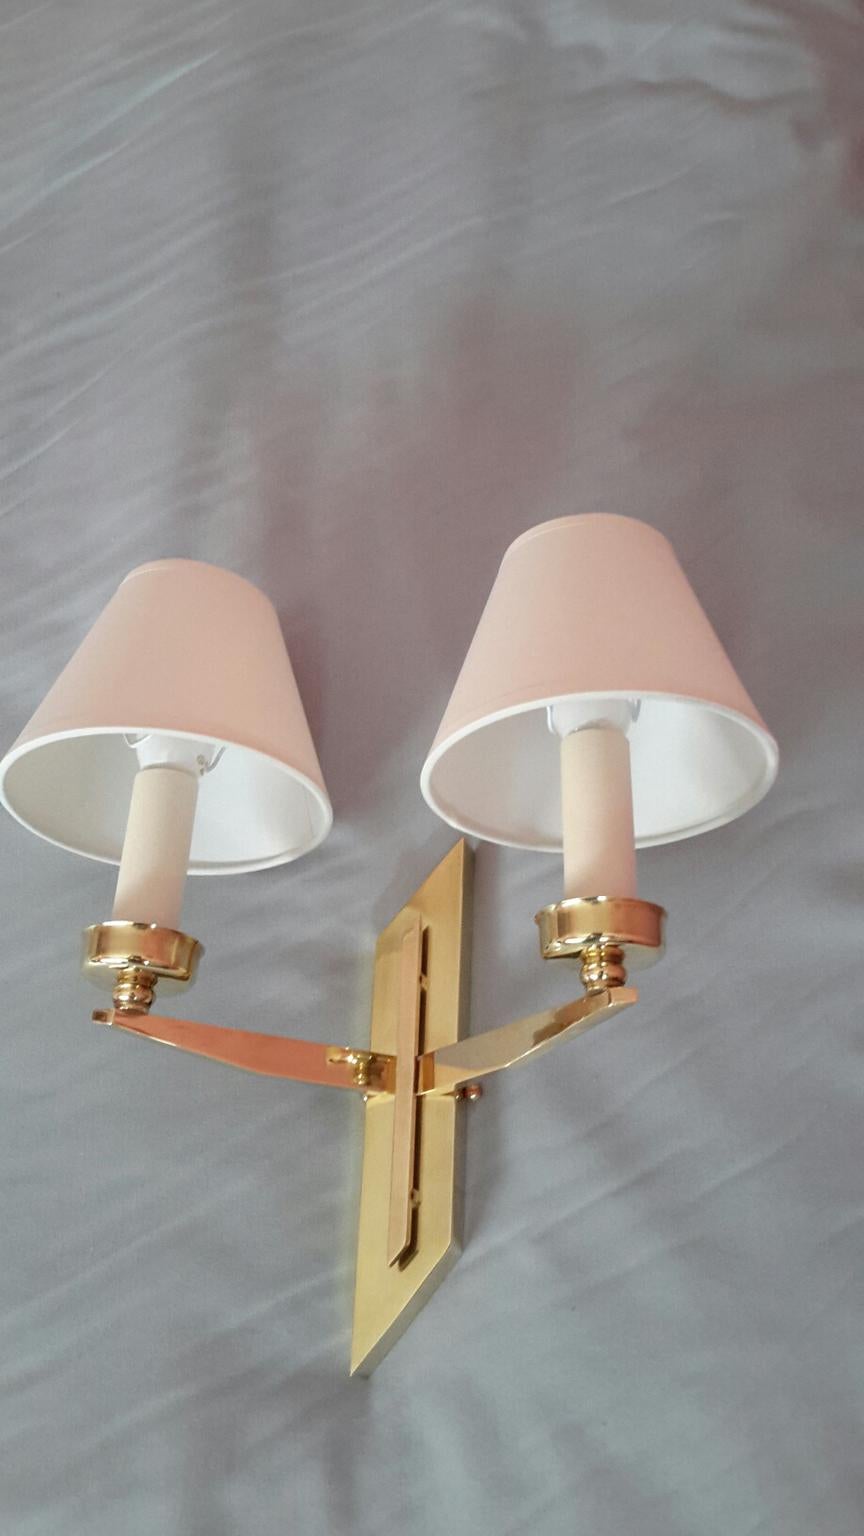 Gilt Pair of French Mid-Century Modern Sconces by Maison Lunel, 1950 For Sale